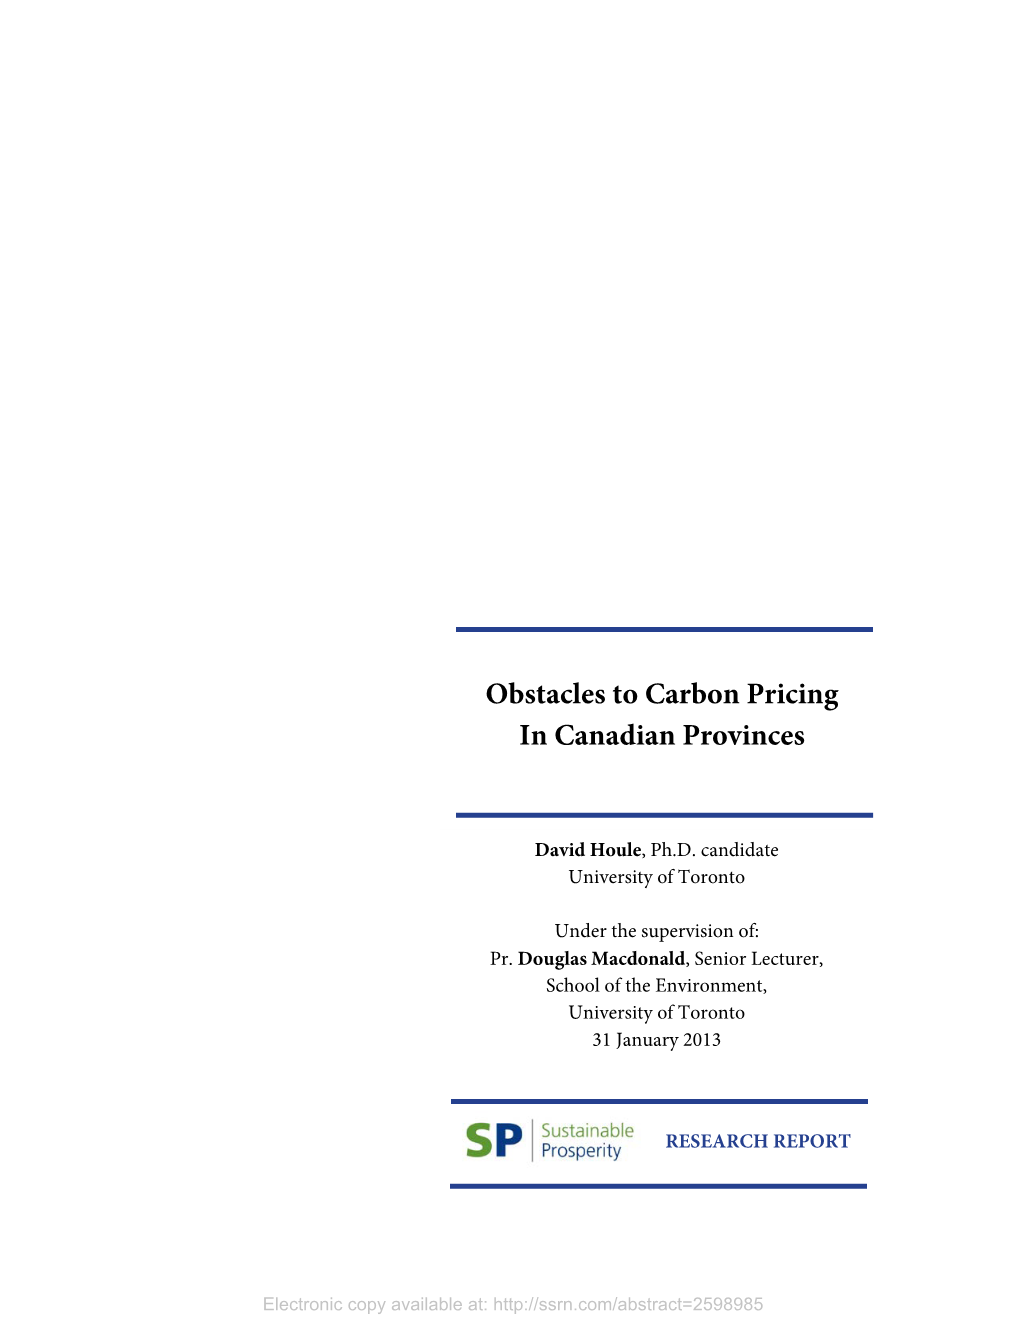 Obstacles to Carbon Pricing in Canadian Provinces